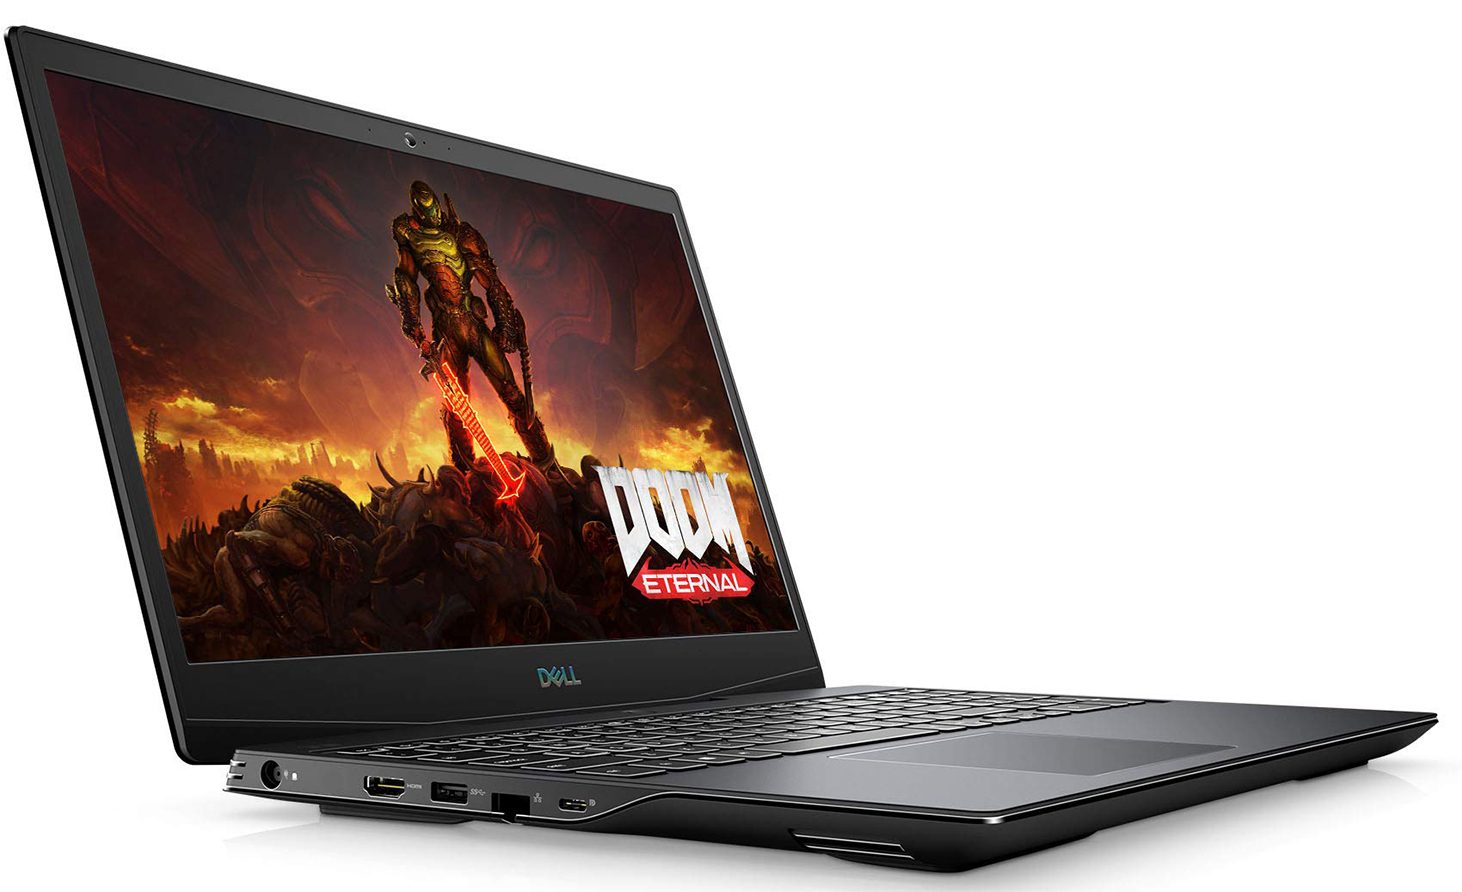 Dell G5 15 (5500) - Specs, Tests, and Prices | LaptopMedia.com